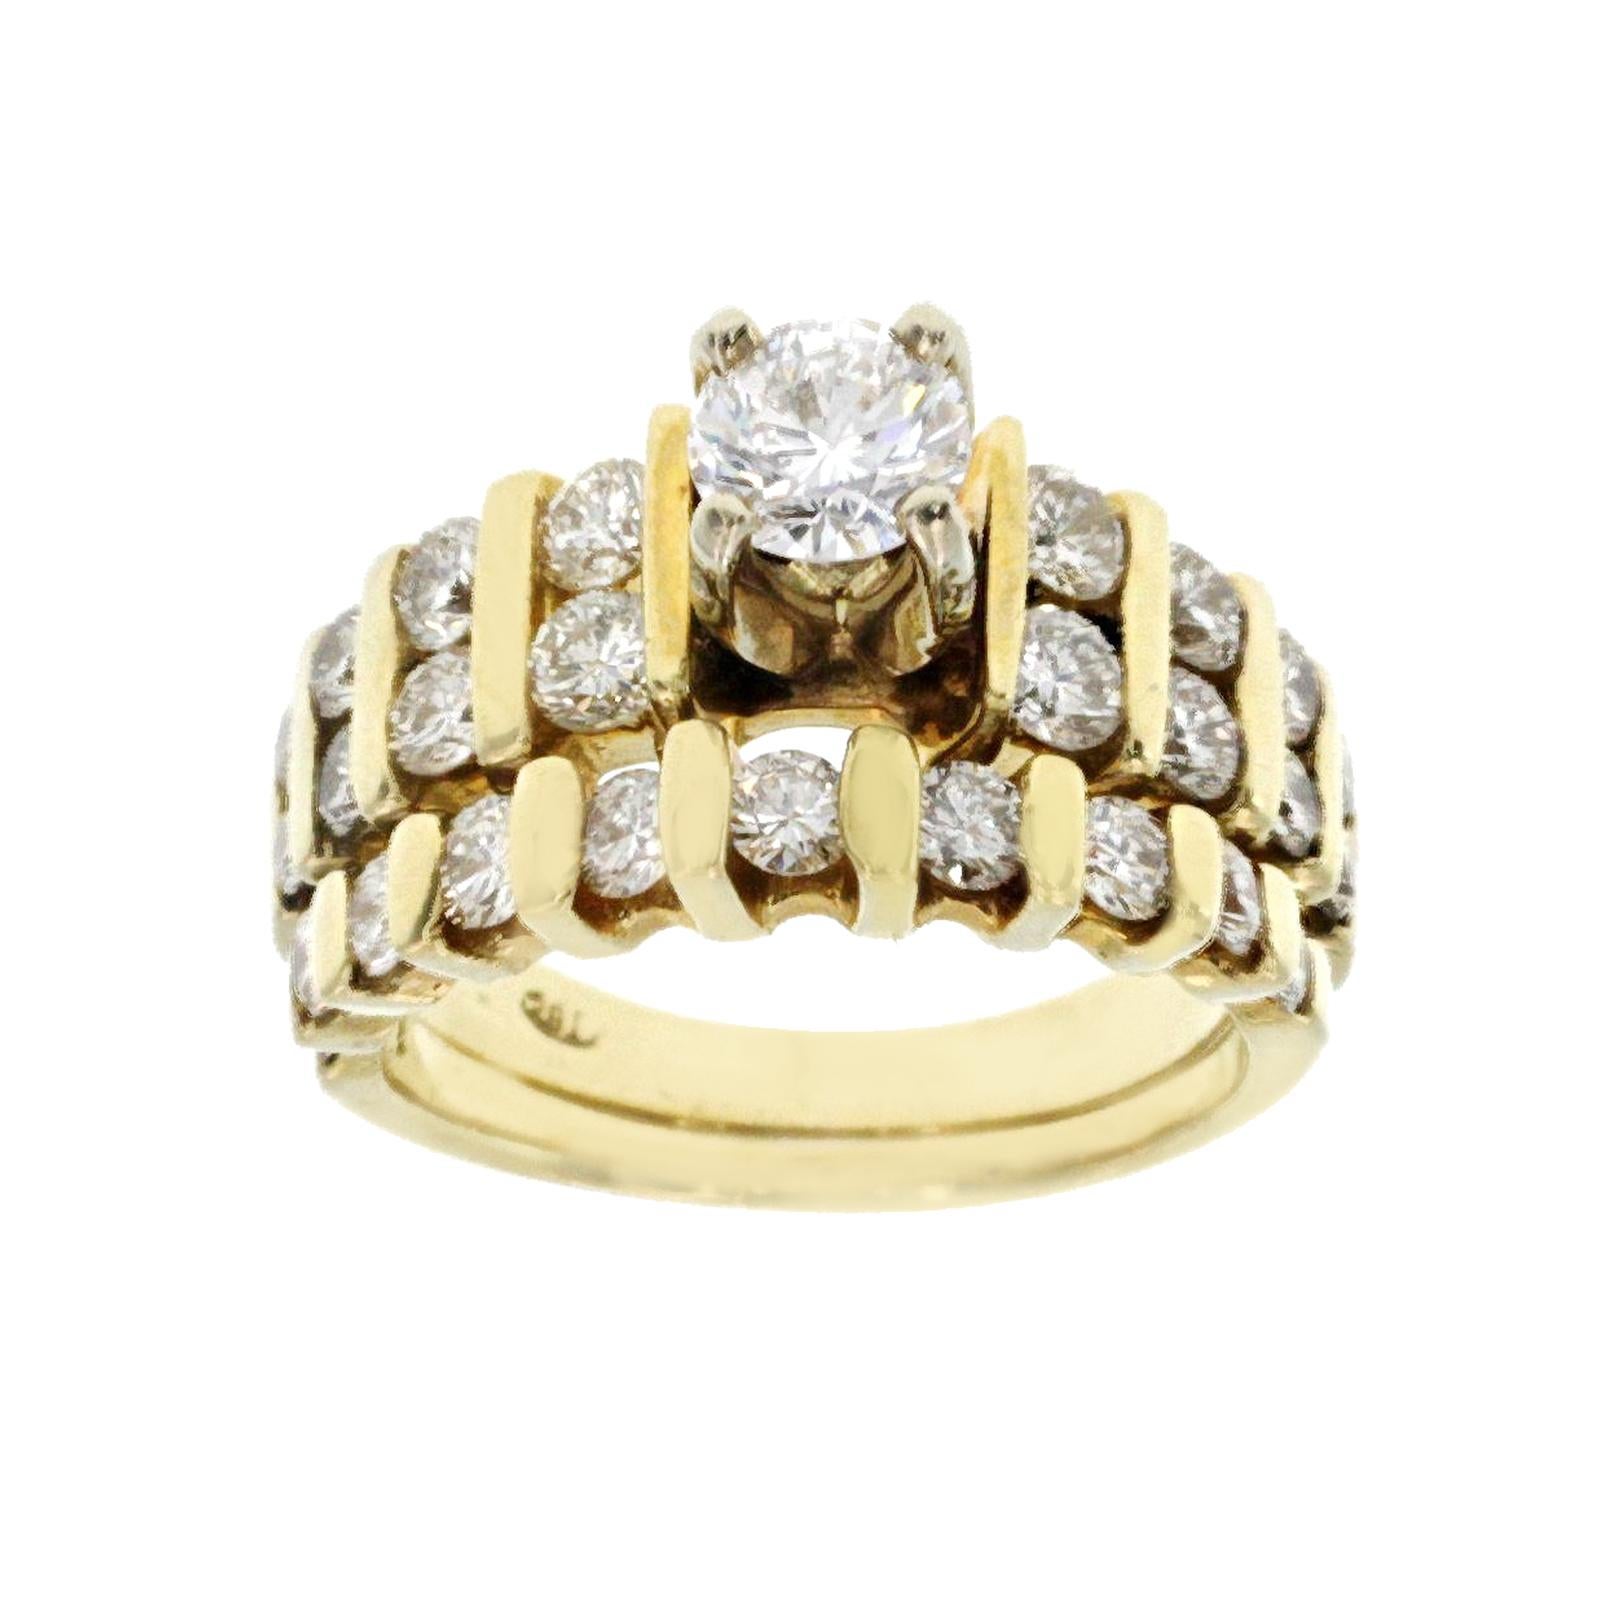 100% Authentic, 100% Customer Satisfaction

Top: 5 mm

Band Width: 3 mm

Ring Height: 8 mm

Metal: 14K Yellow Gold 

Size: 4-6 ( Please message Us for your Size )

Hallmarks: 14K

Total Weight: 7.4 Grams

Center Stone: 0.51 CT G VS Diamonds

Side